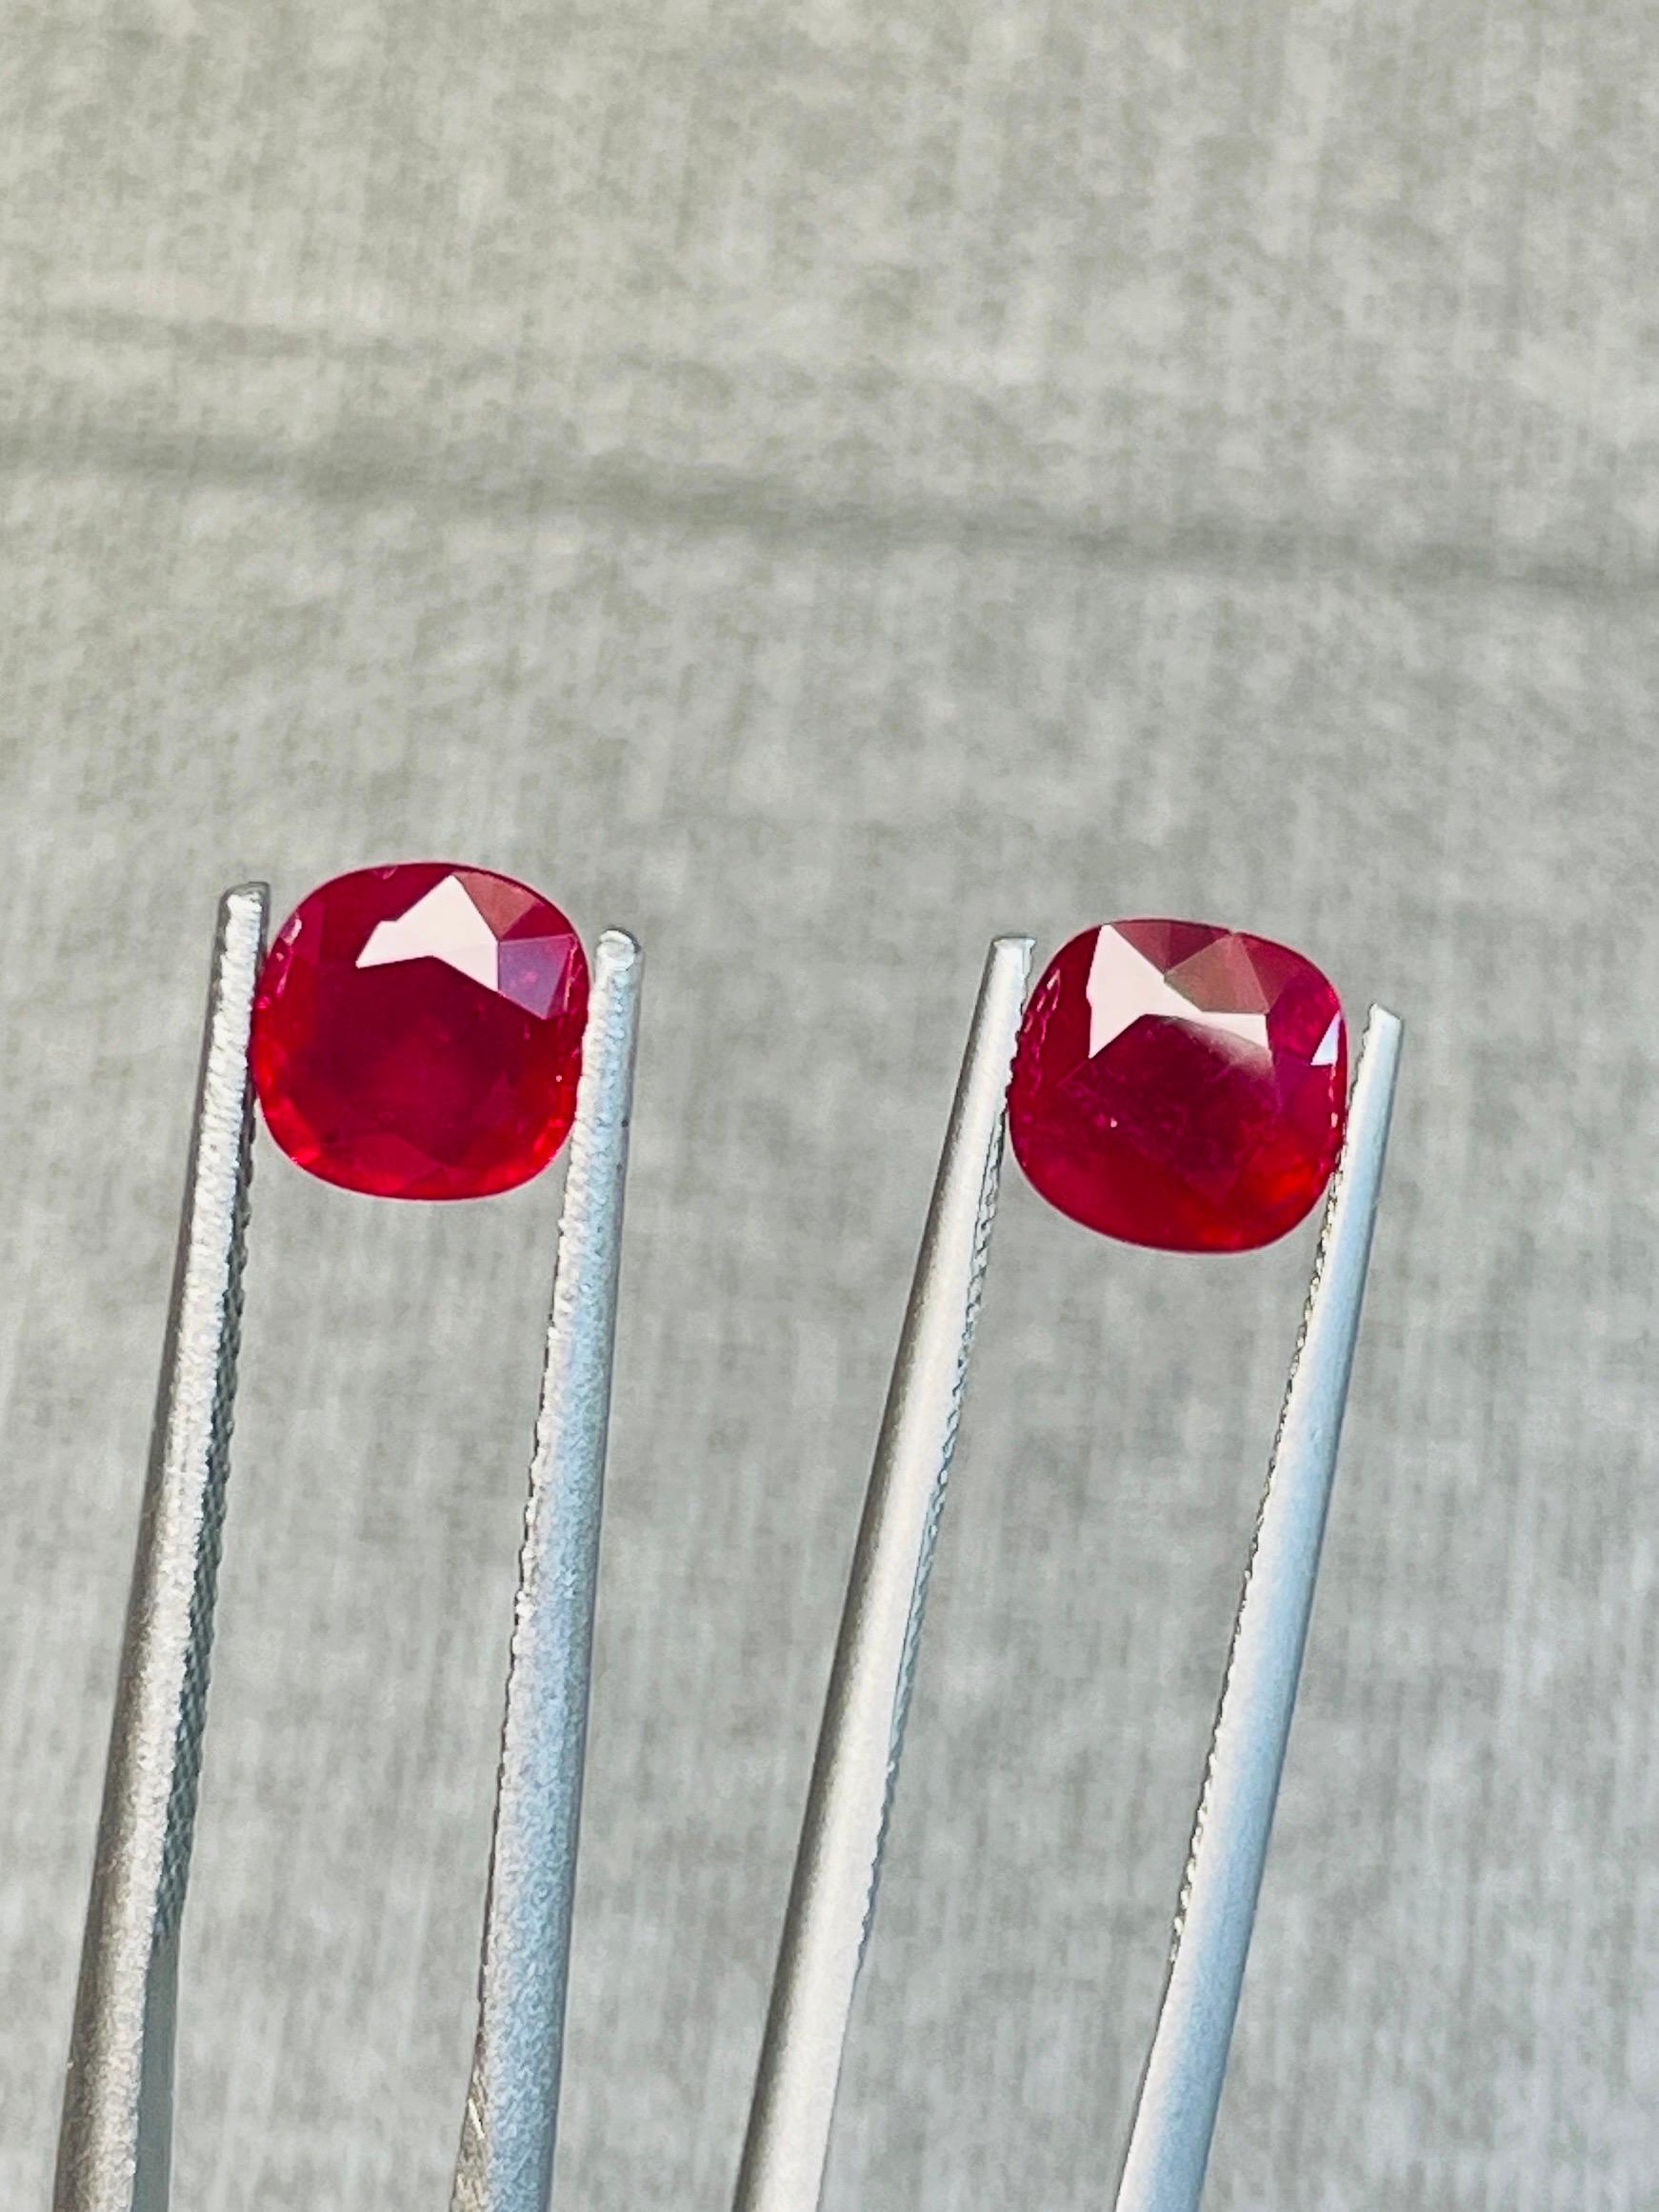 Rare pair 2.06ct burma ruby unheated pigeon blood color GIA AIGS certificate  For Sale 2